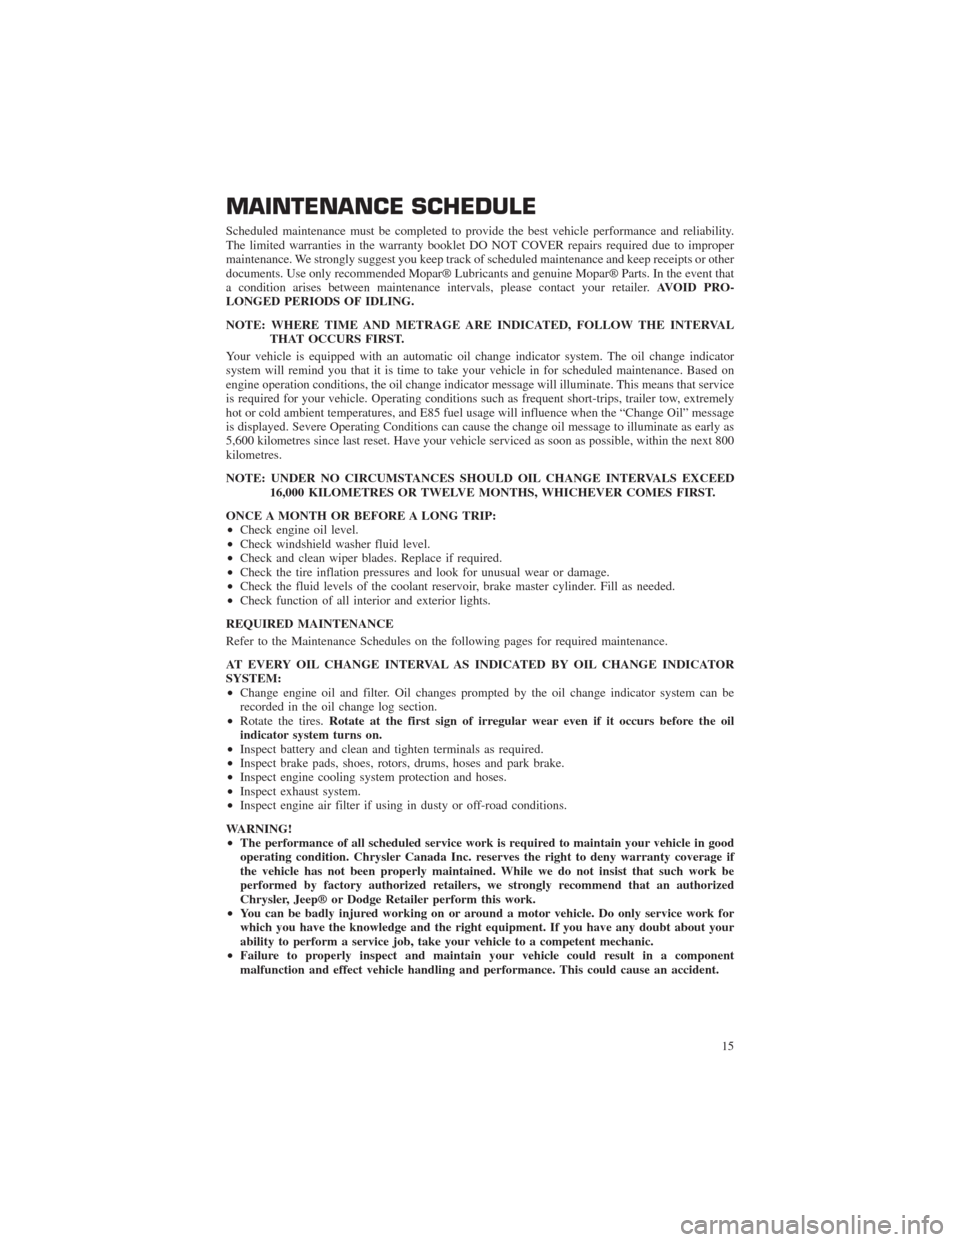 CHRYSLER 300 2014 2.G Warranty Booklet MAINTENANCE SCHEDULE
Scheduled maintenance must be completed to provide the best vehicle performance and reliability.
The limited warranties in the warranty booklet DO NOT COVER repairs required due t